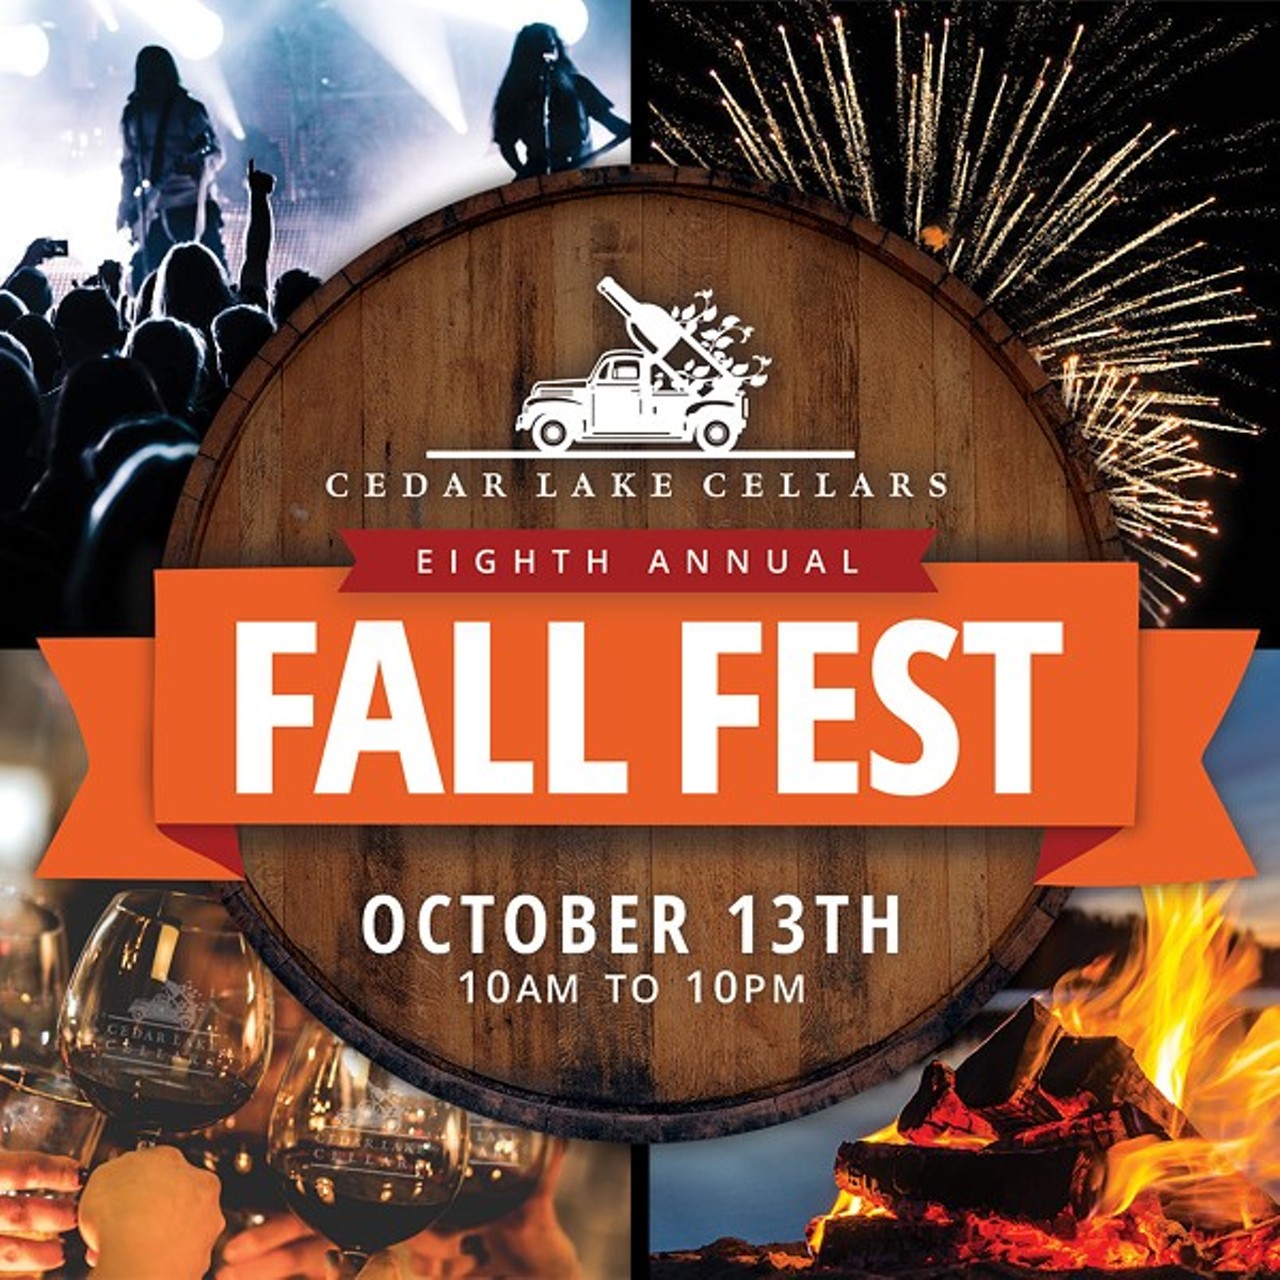 Cedar Lake Cellars Fall Fest
October 13, 2018
You have to be at least 21 years old, but just $10 gets you all-day winery access and fireworks at 8 that night. There are also bands all day! Check out Smash Band from 1 to 4 p.m., Yacht Rockers from 4 to 7 p.m., and Boogie Chyld from 7 to 10 p.m.
Check it out here.
Photo courtesy of BrandveinPR